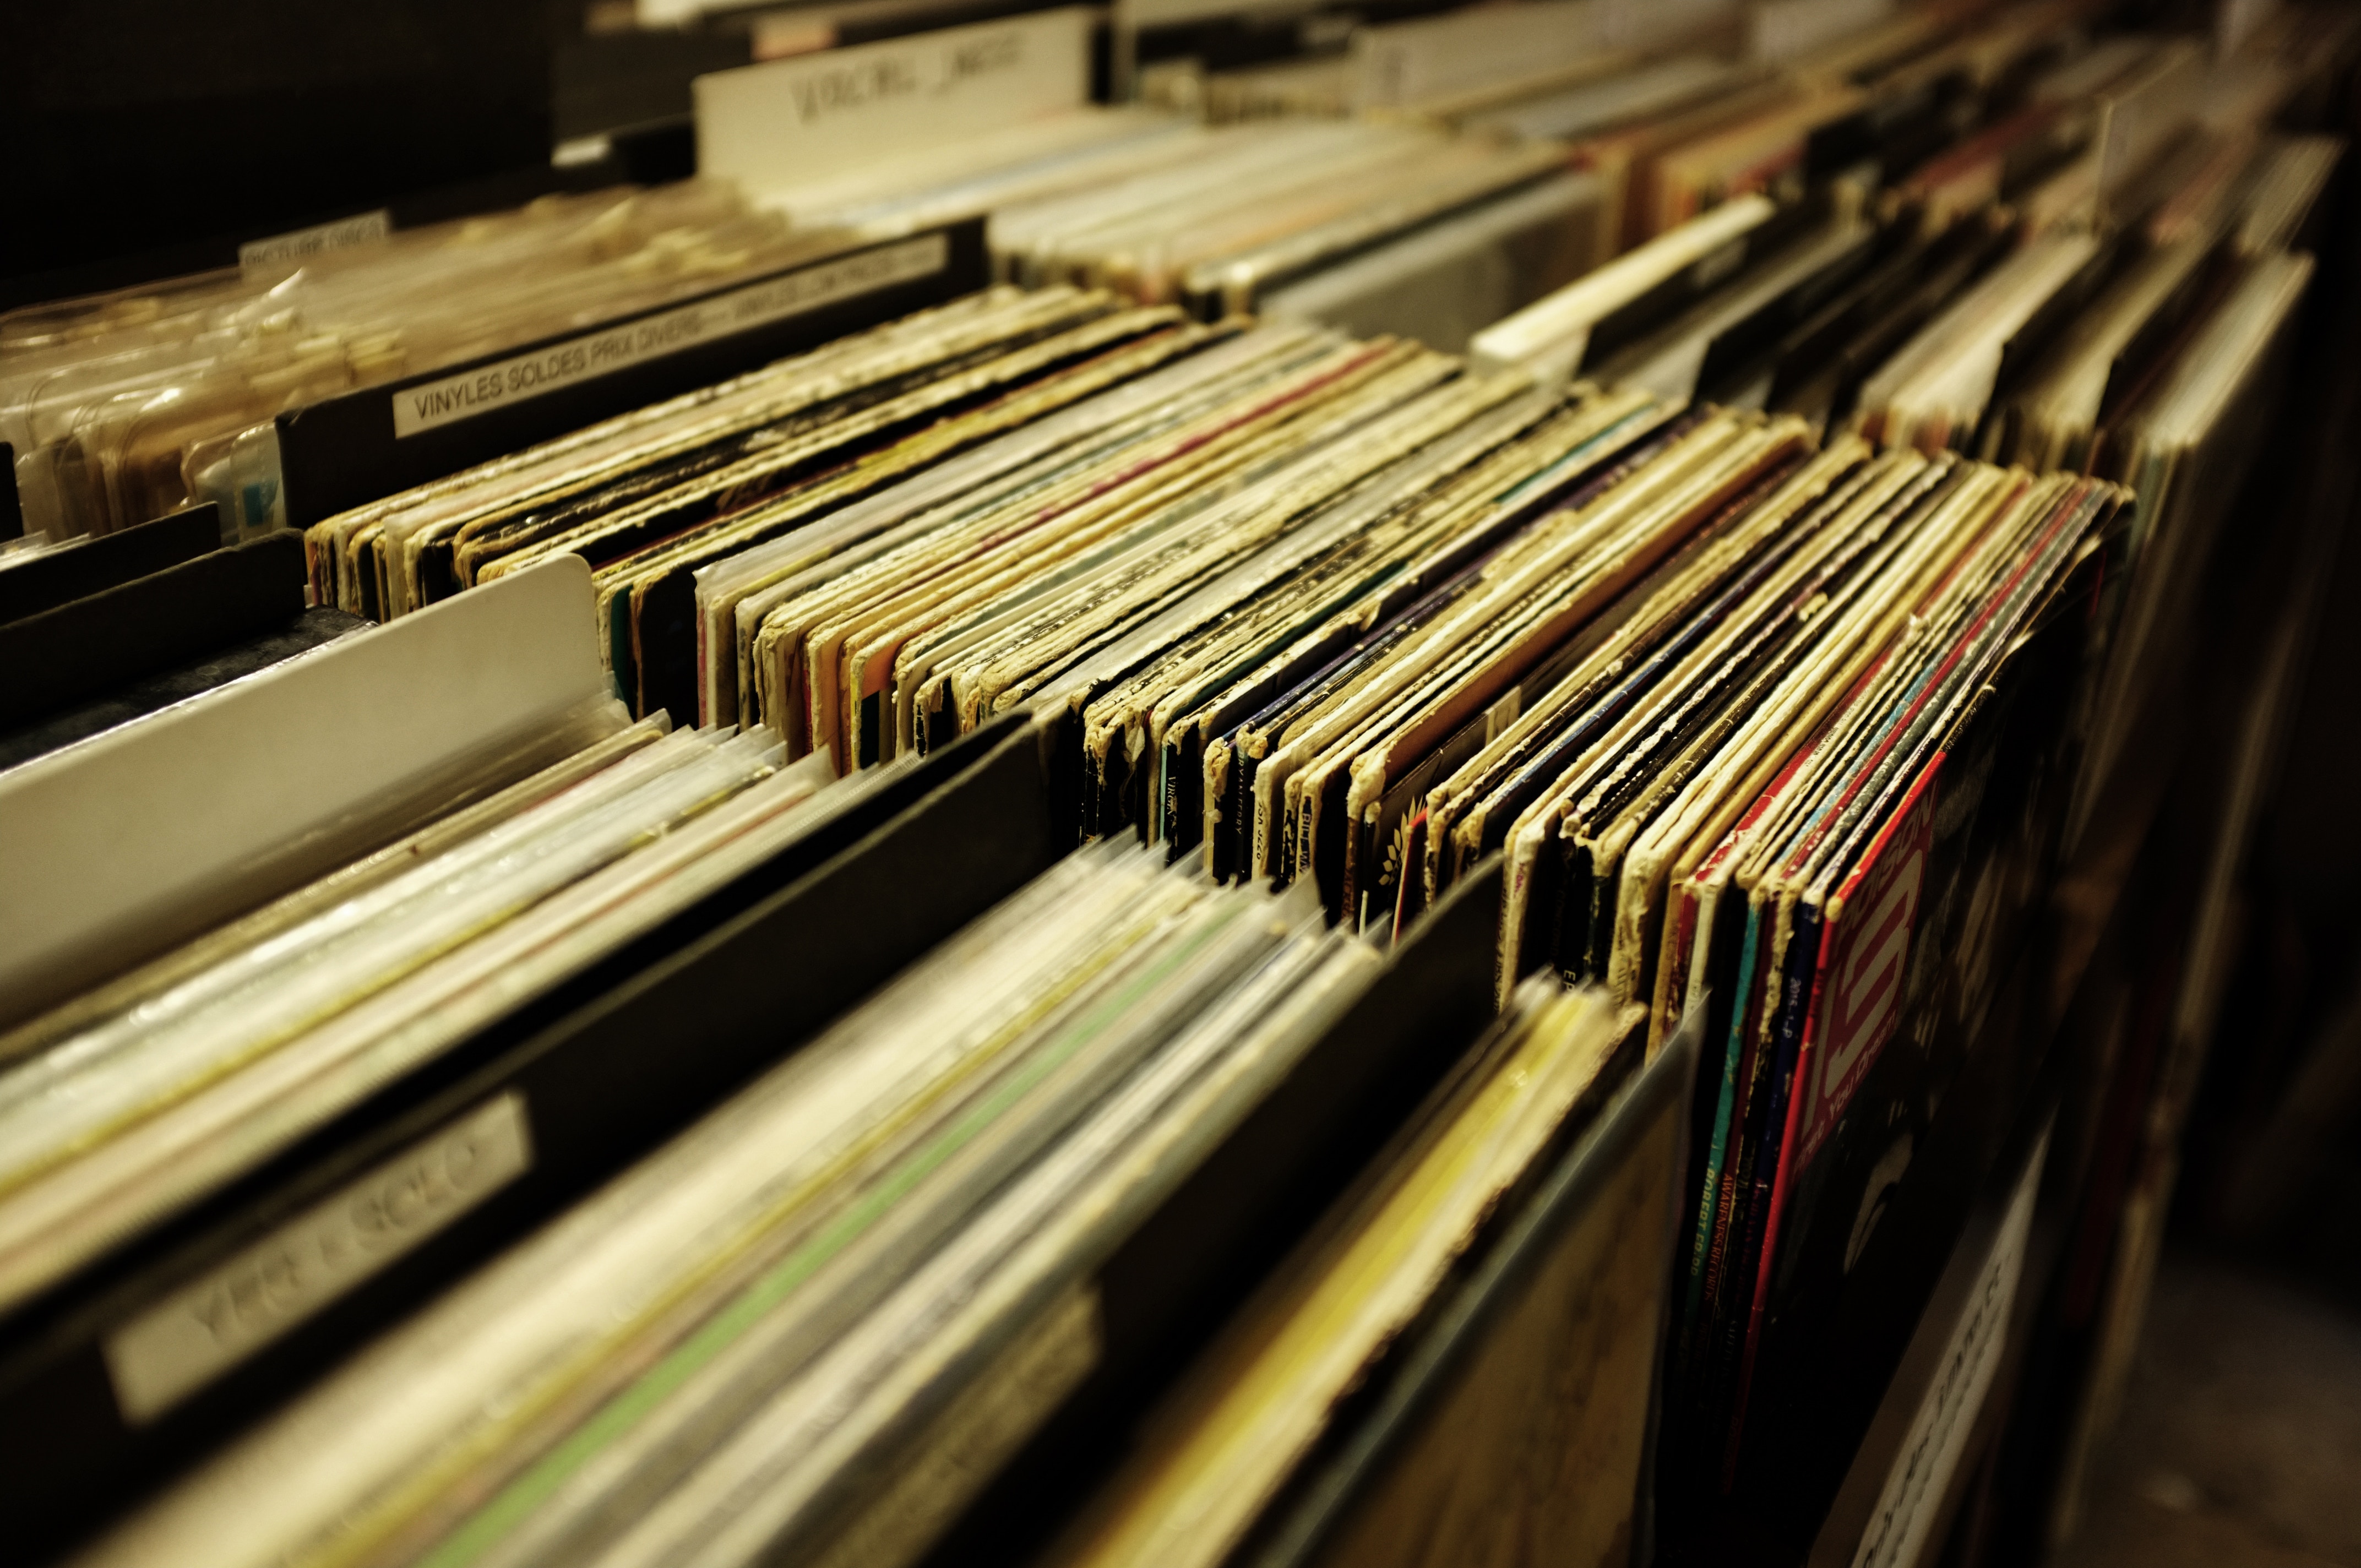 old record albums in bins from unsplash.com